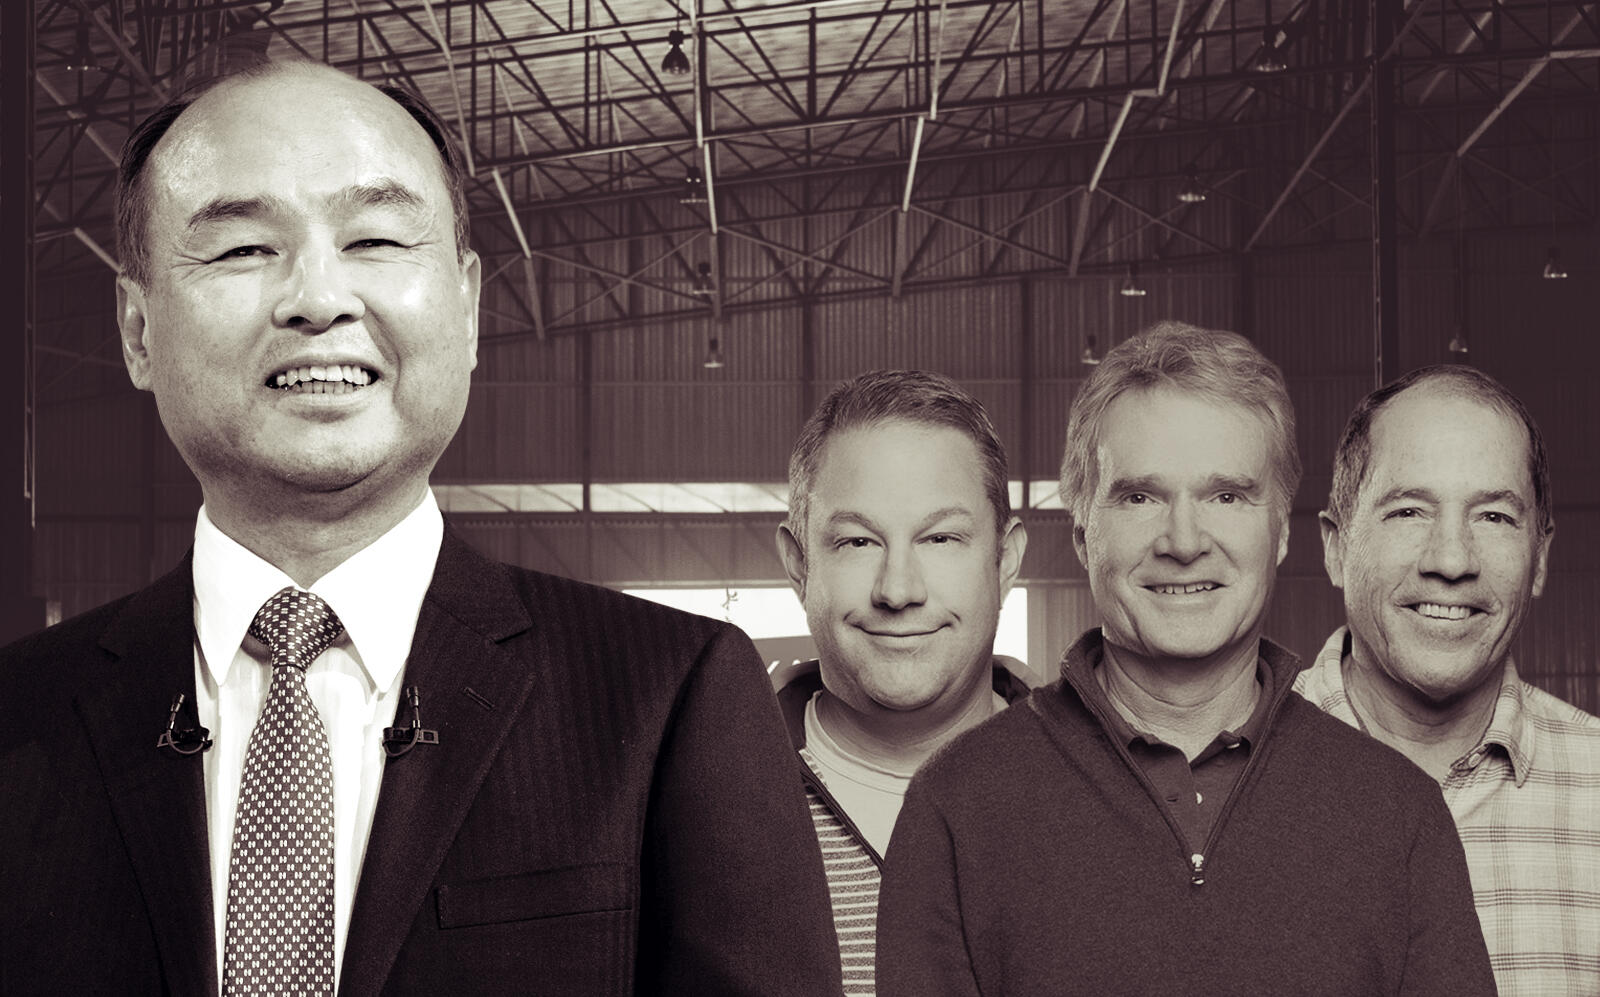 Masayoshi Son and Katerra's founders Fritz Wolff, Jim Davidson and Michael Marks. (Getty, Katerra)